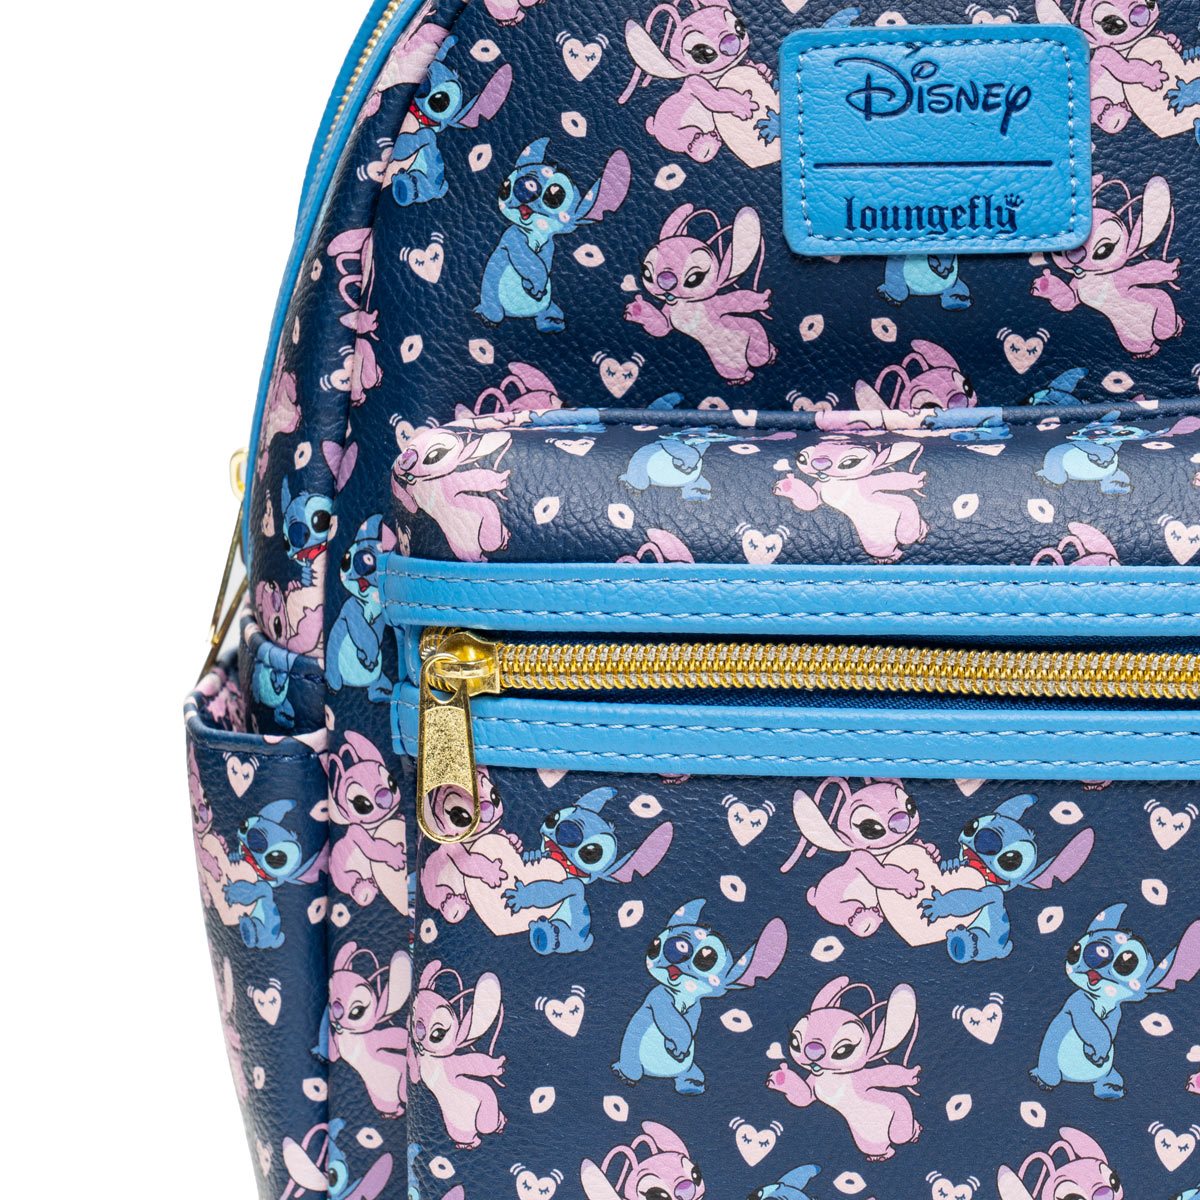 lilo and stitch backpack